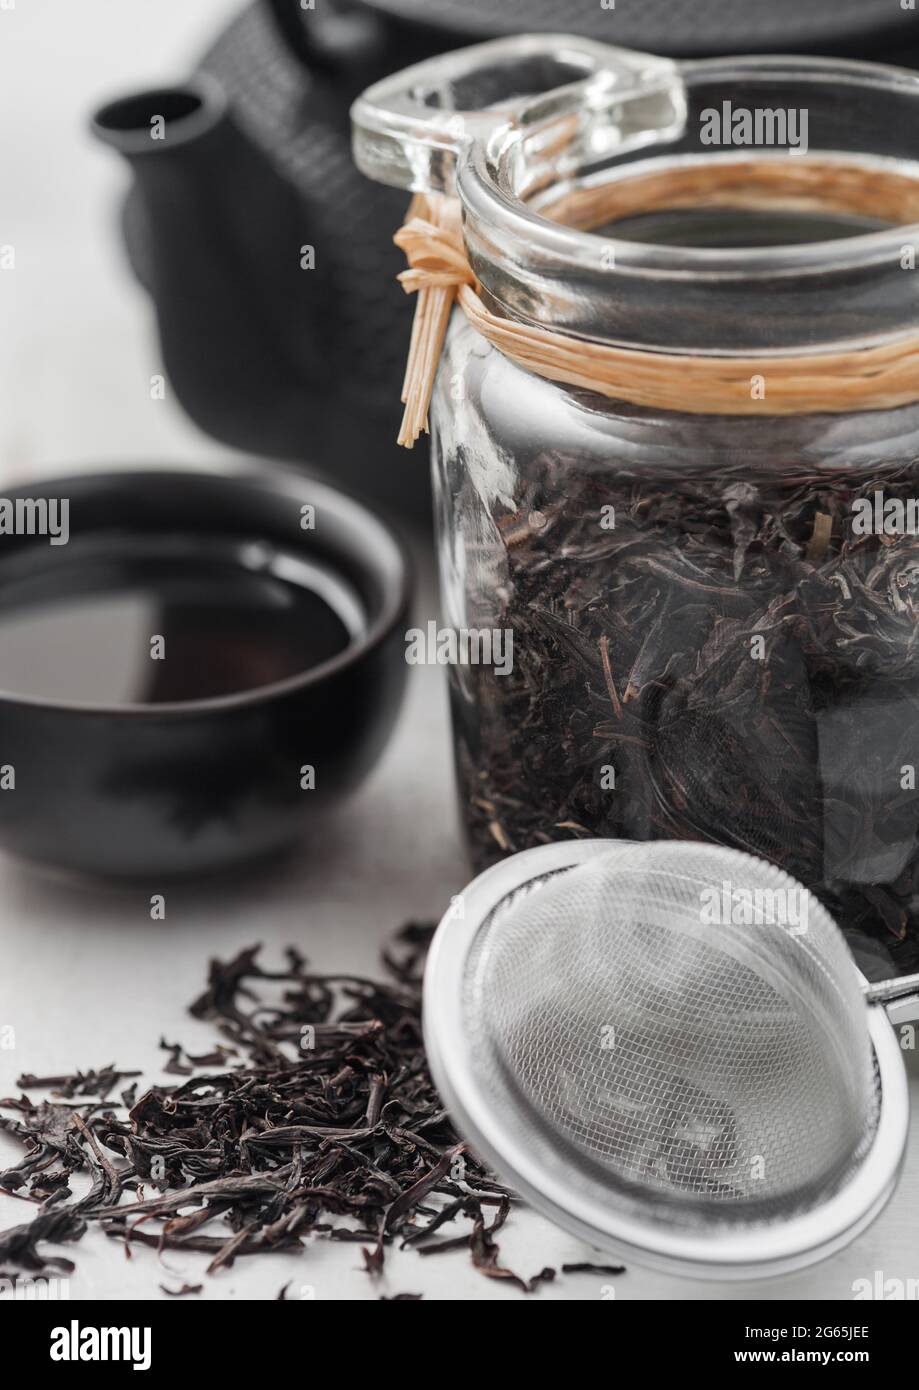 https://c8.alamy.com/comp/2G65JEE/glass-jar-of-black-loose-organic-tea-with-teapot-and-cup-with-tea-strainer-infuser-on-light-background-2G65JEE.jpg